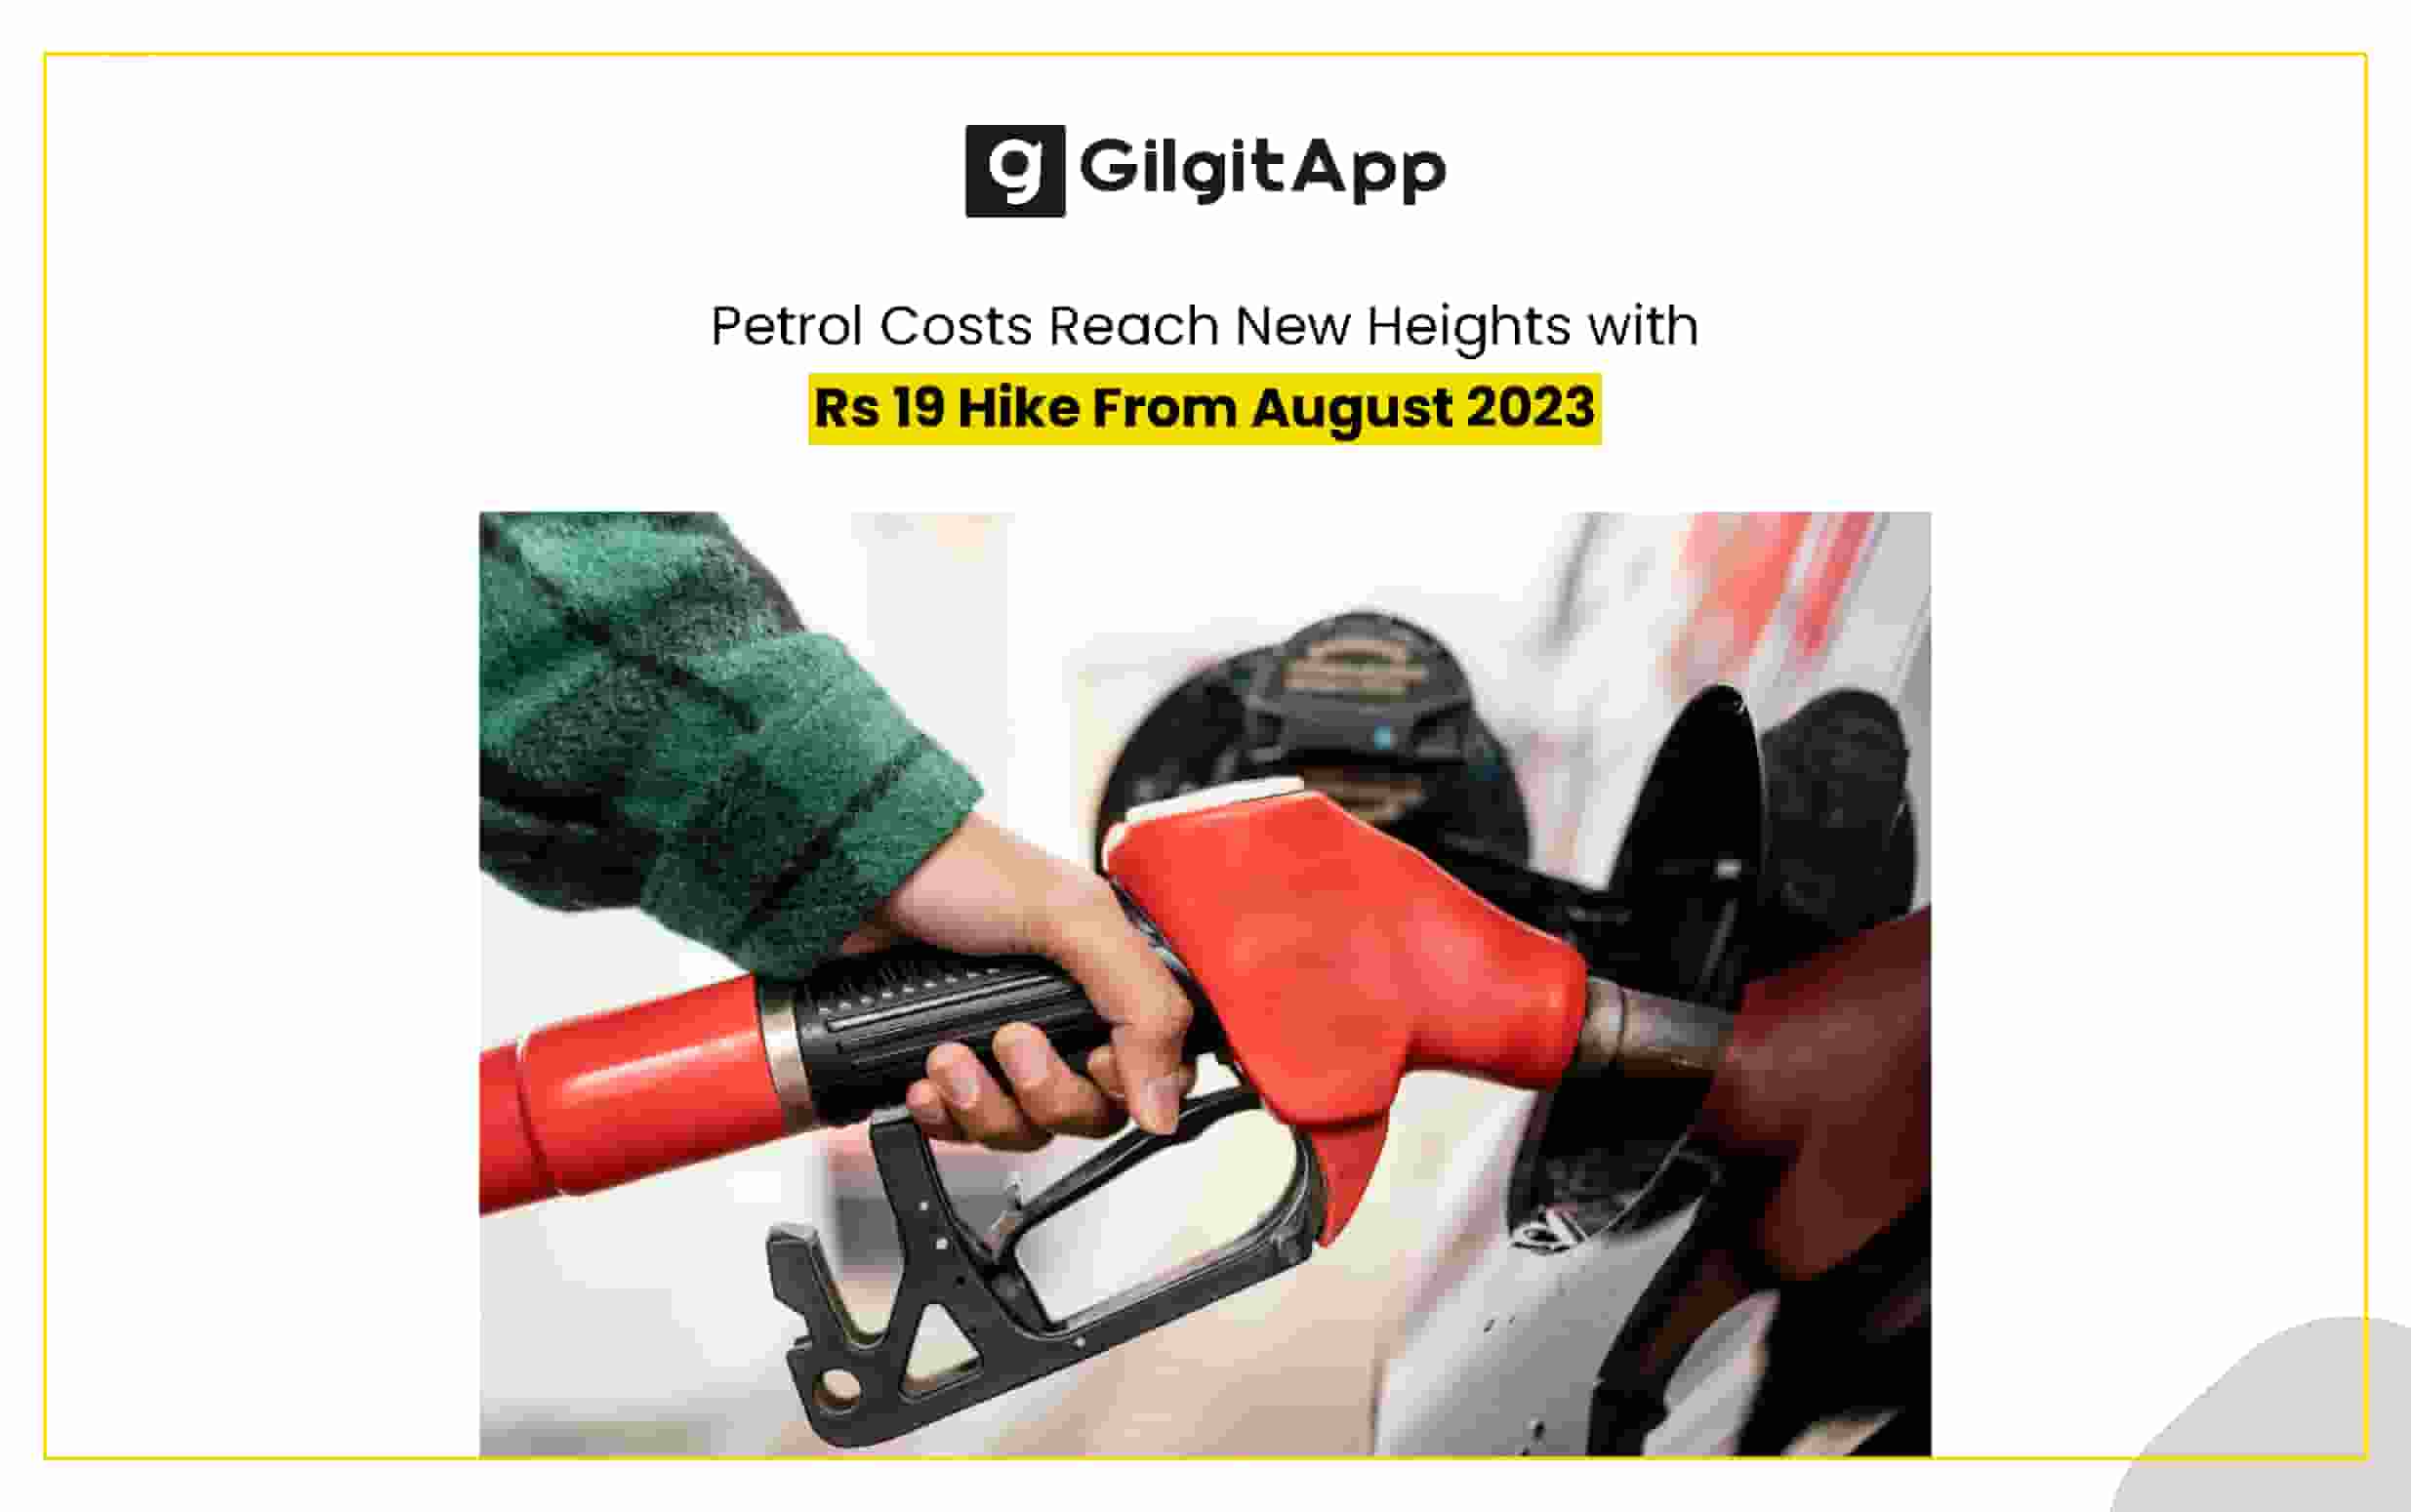 Petrol Cost Plunges High  with Rs 19 Hike From August 2023